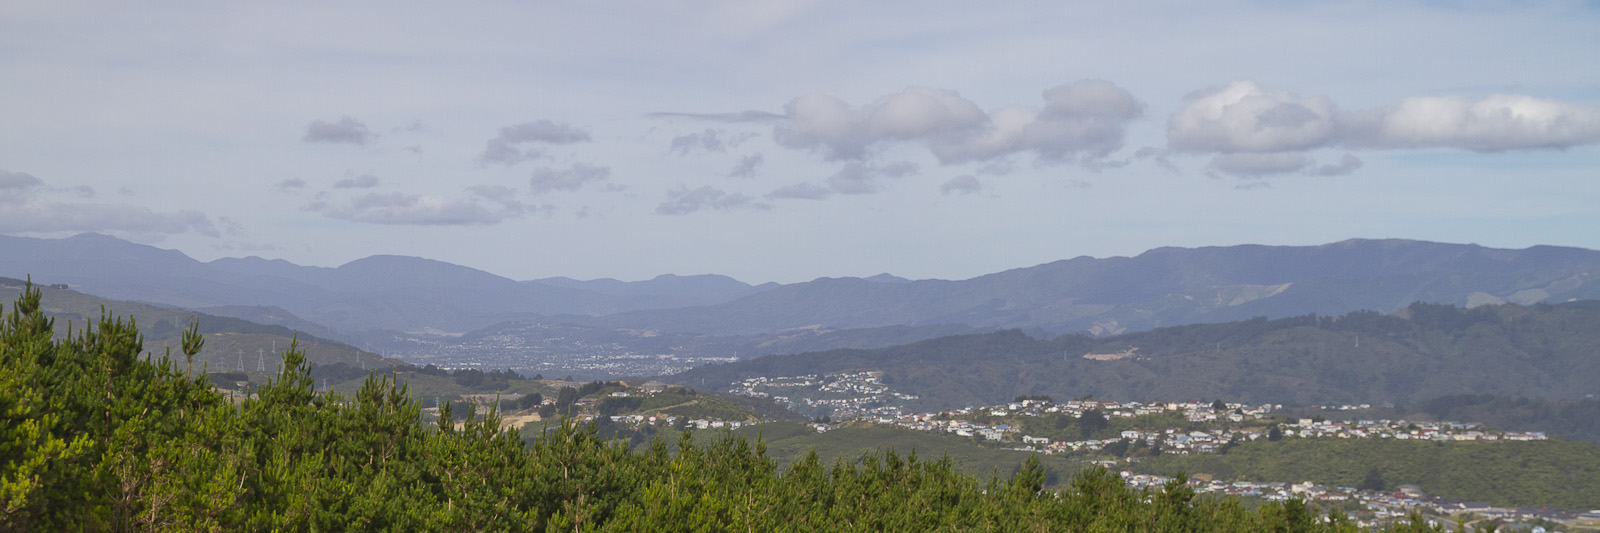 View to the North towards the Tararuas looking North from Belmont Reional Park